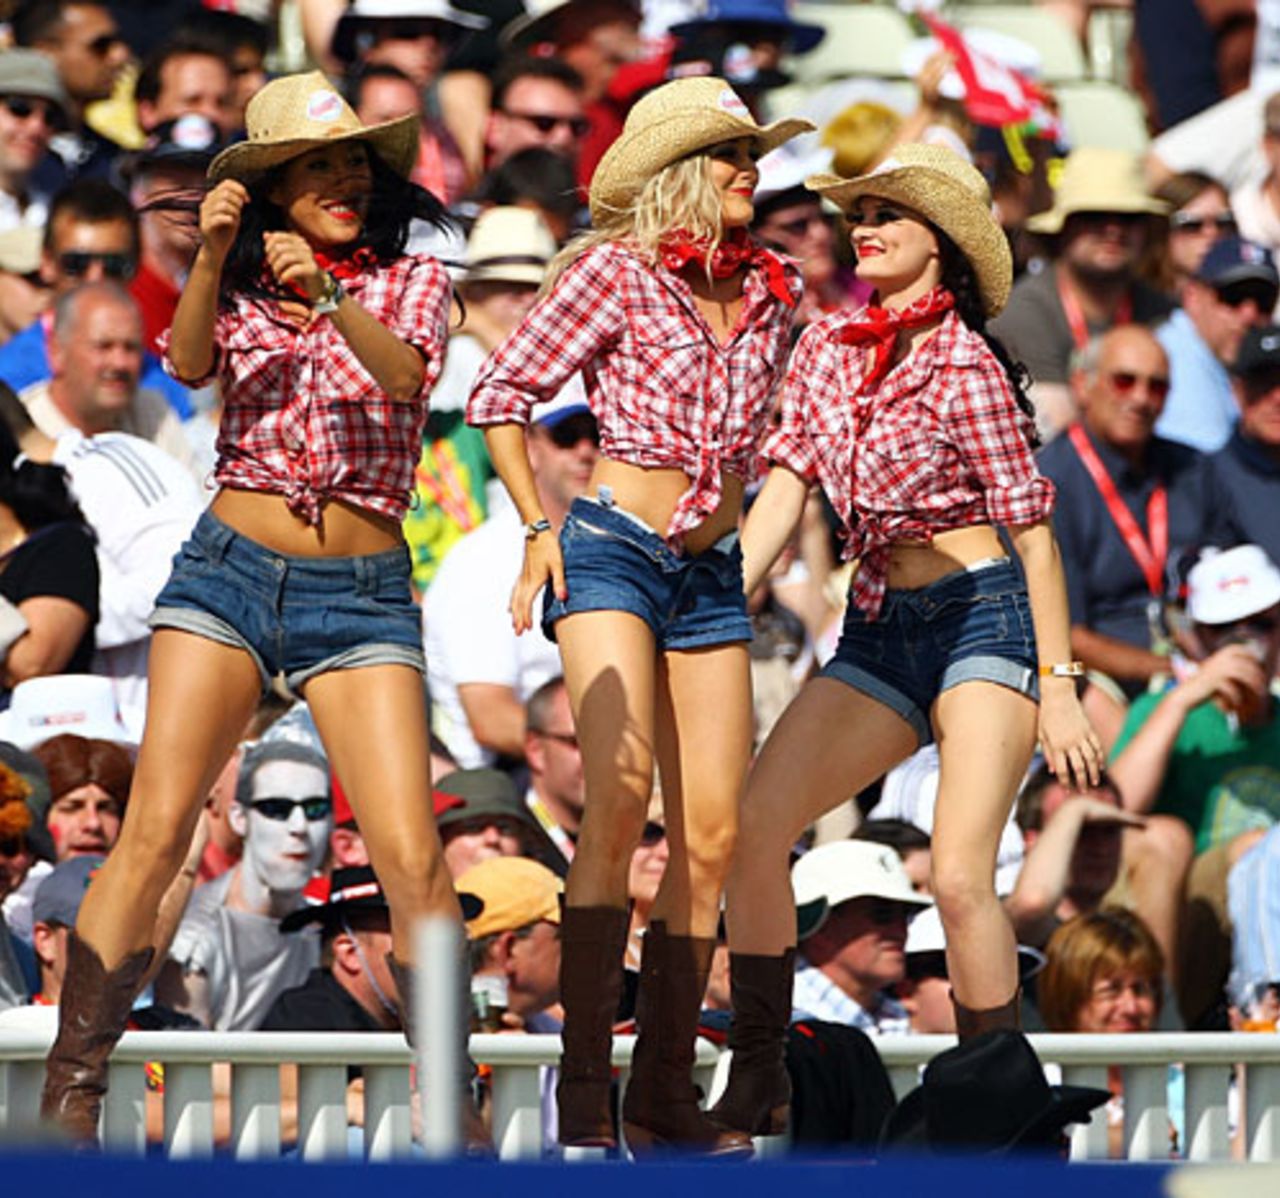 There was a wild west theme to Twenty20 Finals Day, with the cowgirls providing plenty of entertainment, Northamptonshire v Sussex, Twenty20 Cup semi-final, Edgbaston, August 15, 2009